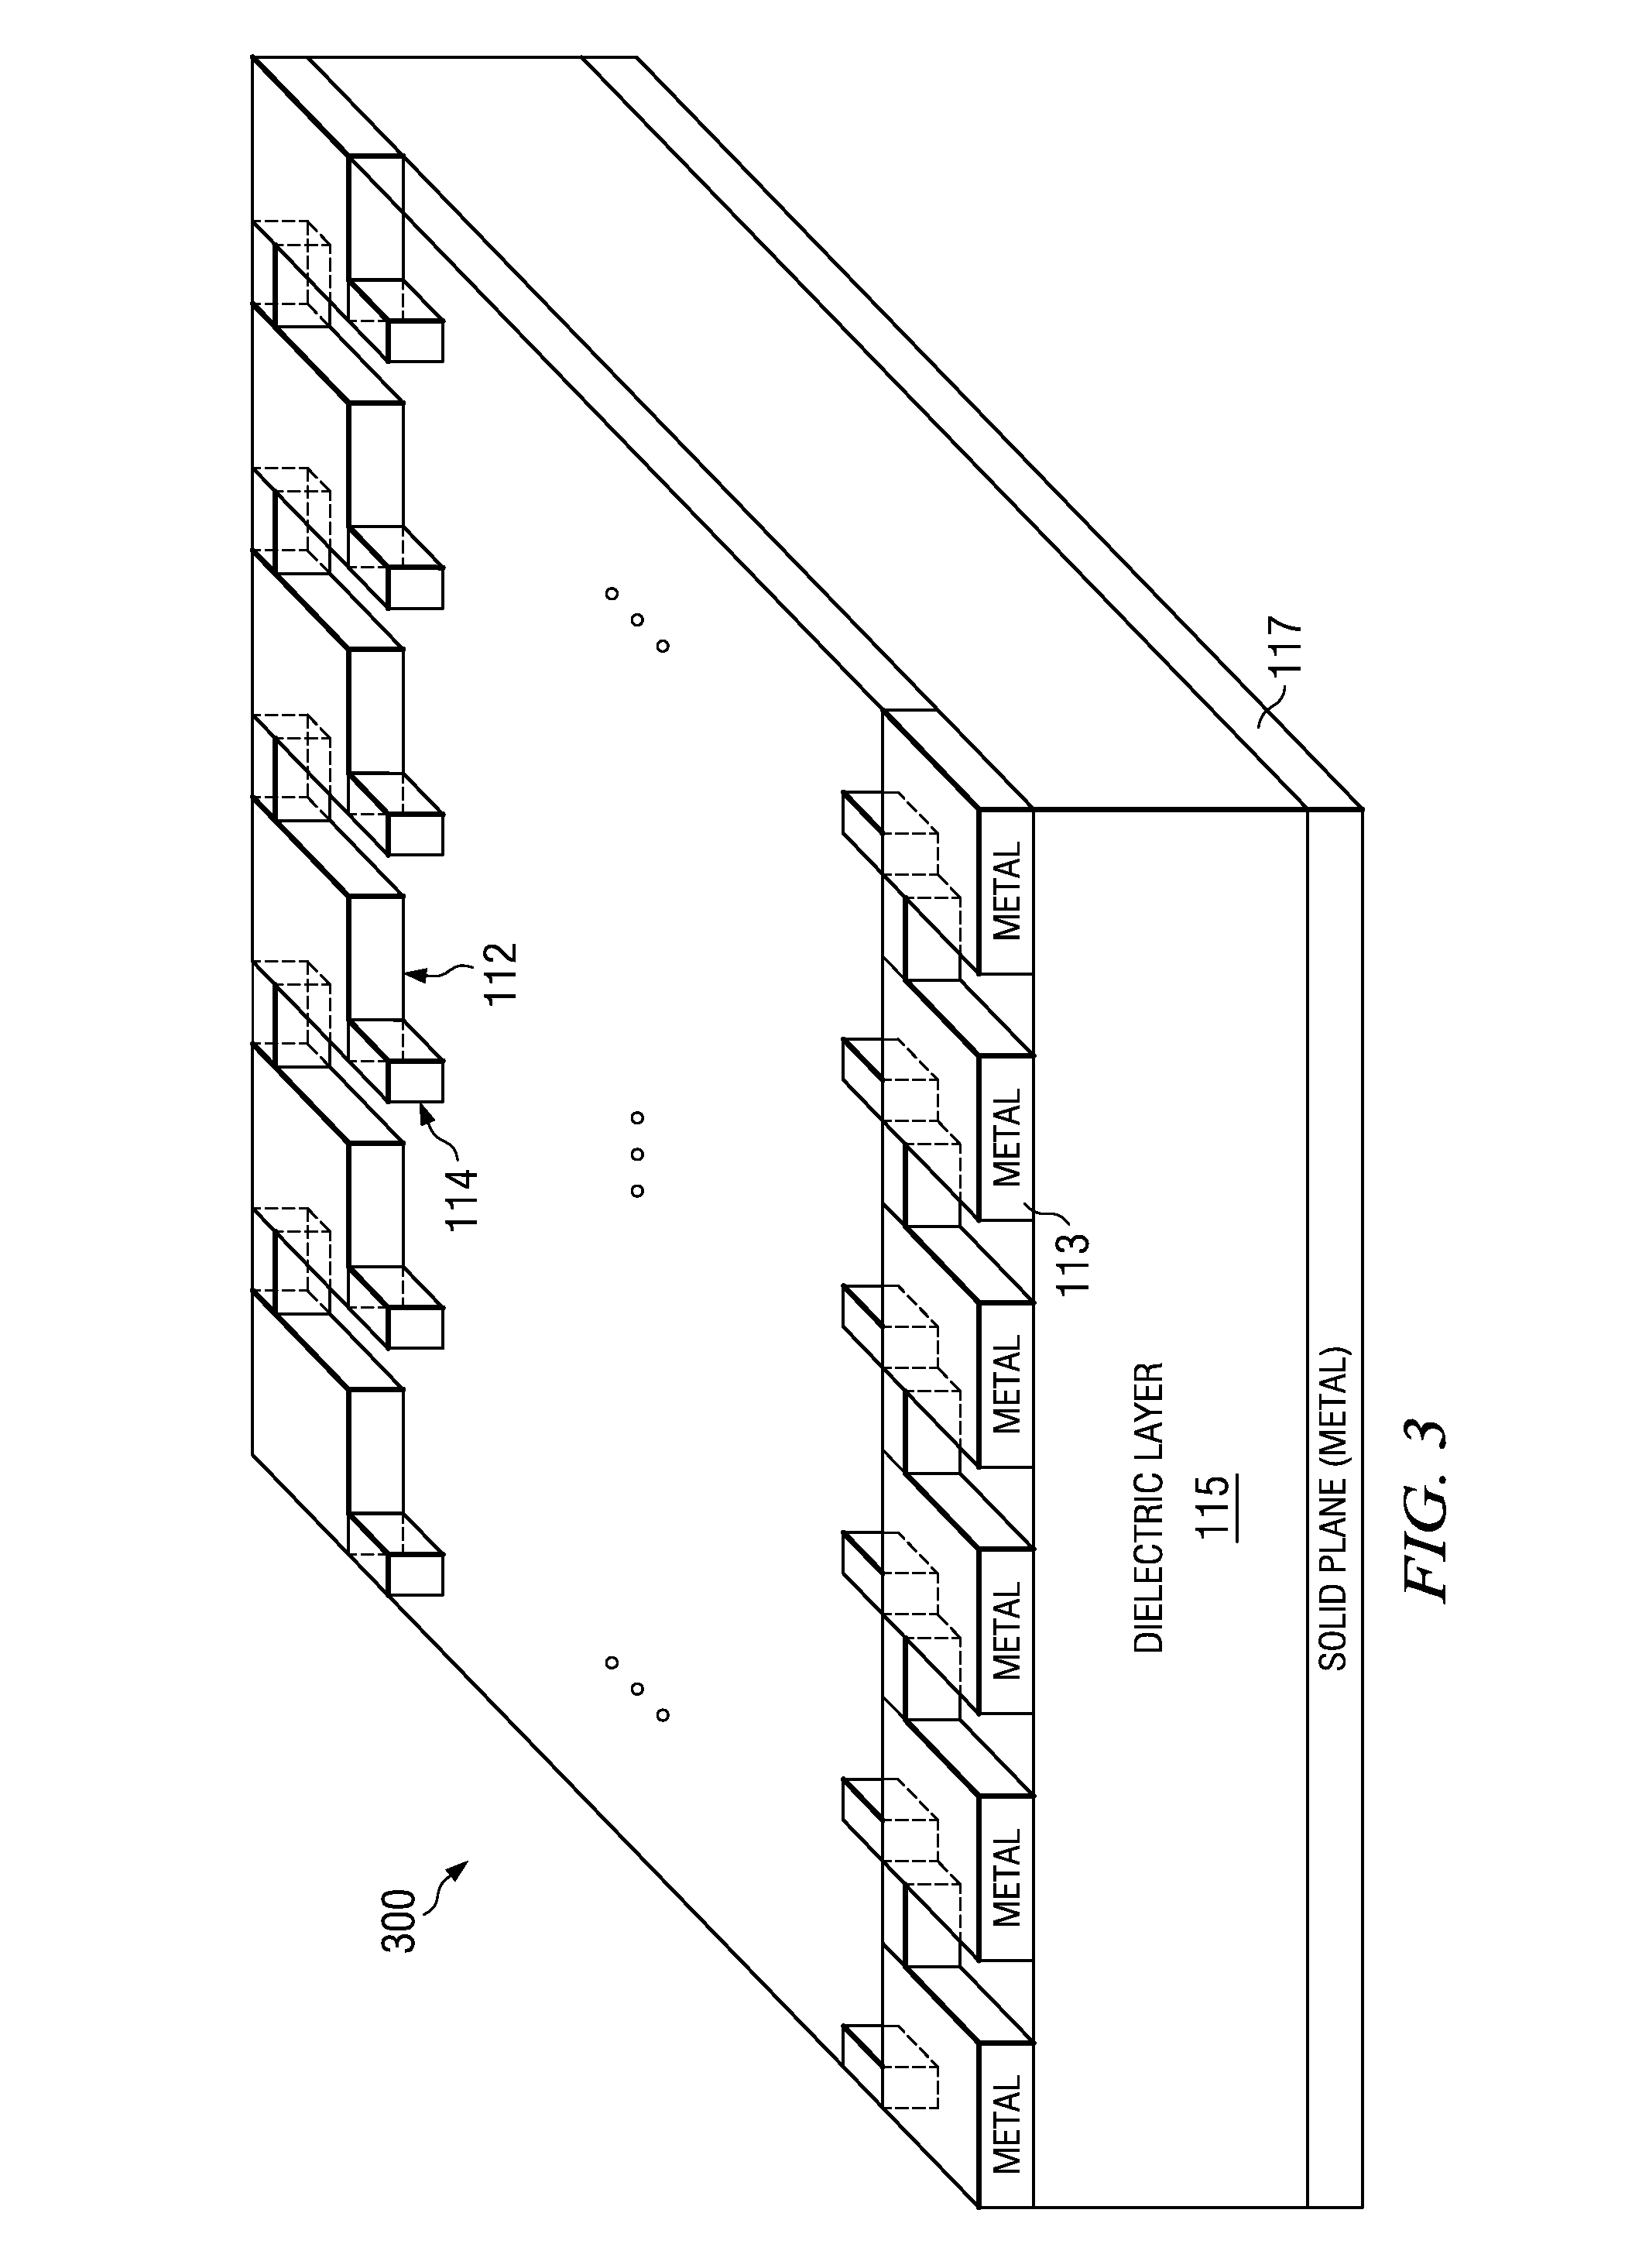 Method for Ultimate Noise Isolation in High-Speed Digital Systems on Packages and Printed Circuit Boards (PCBS)